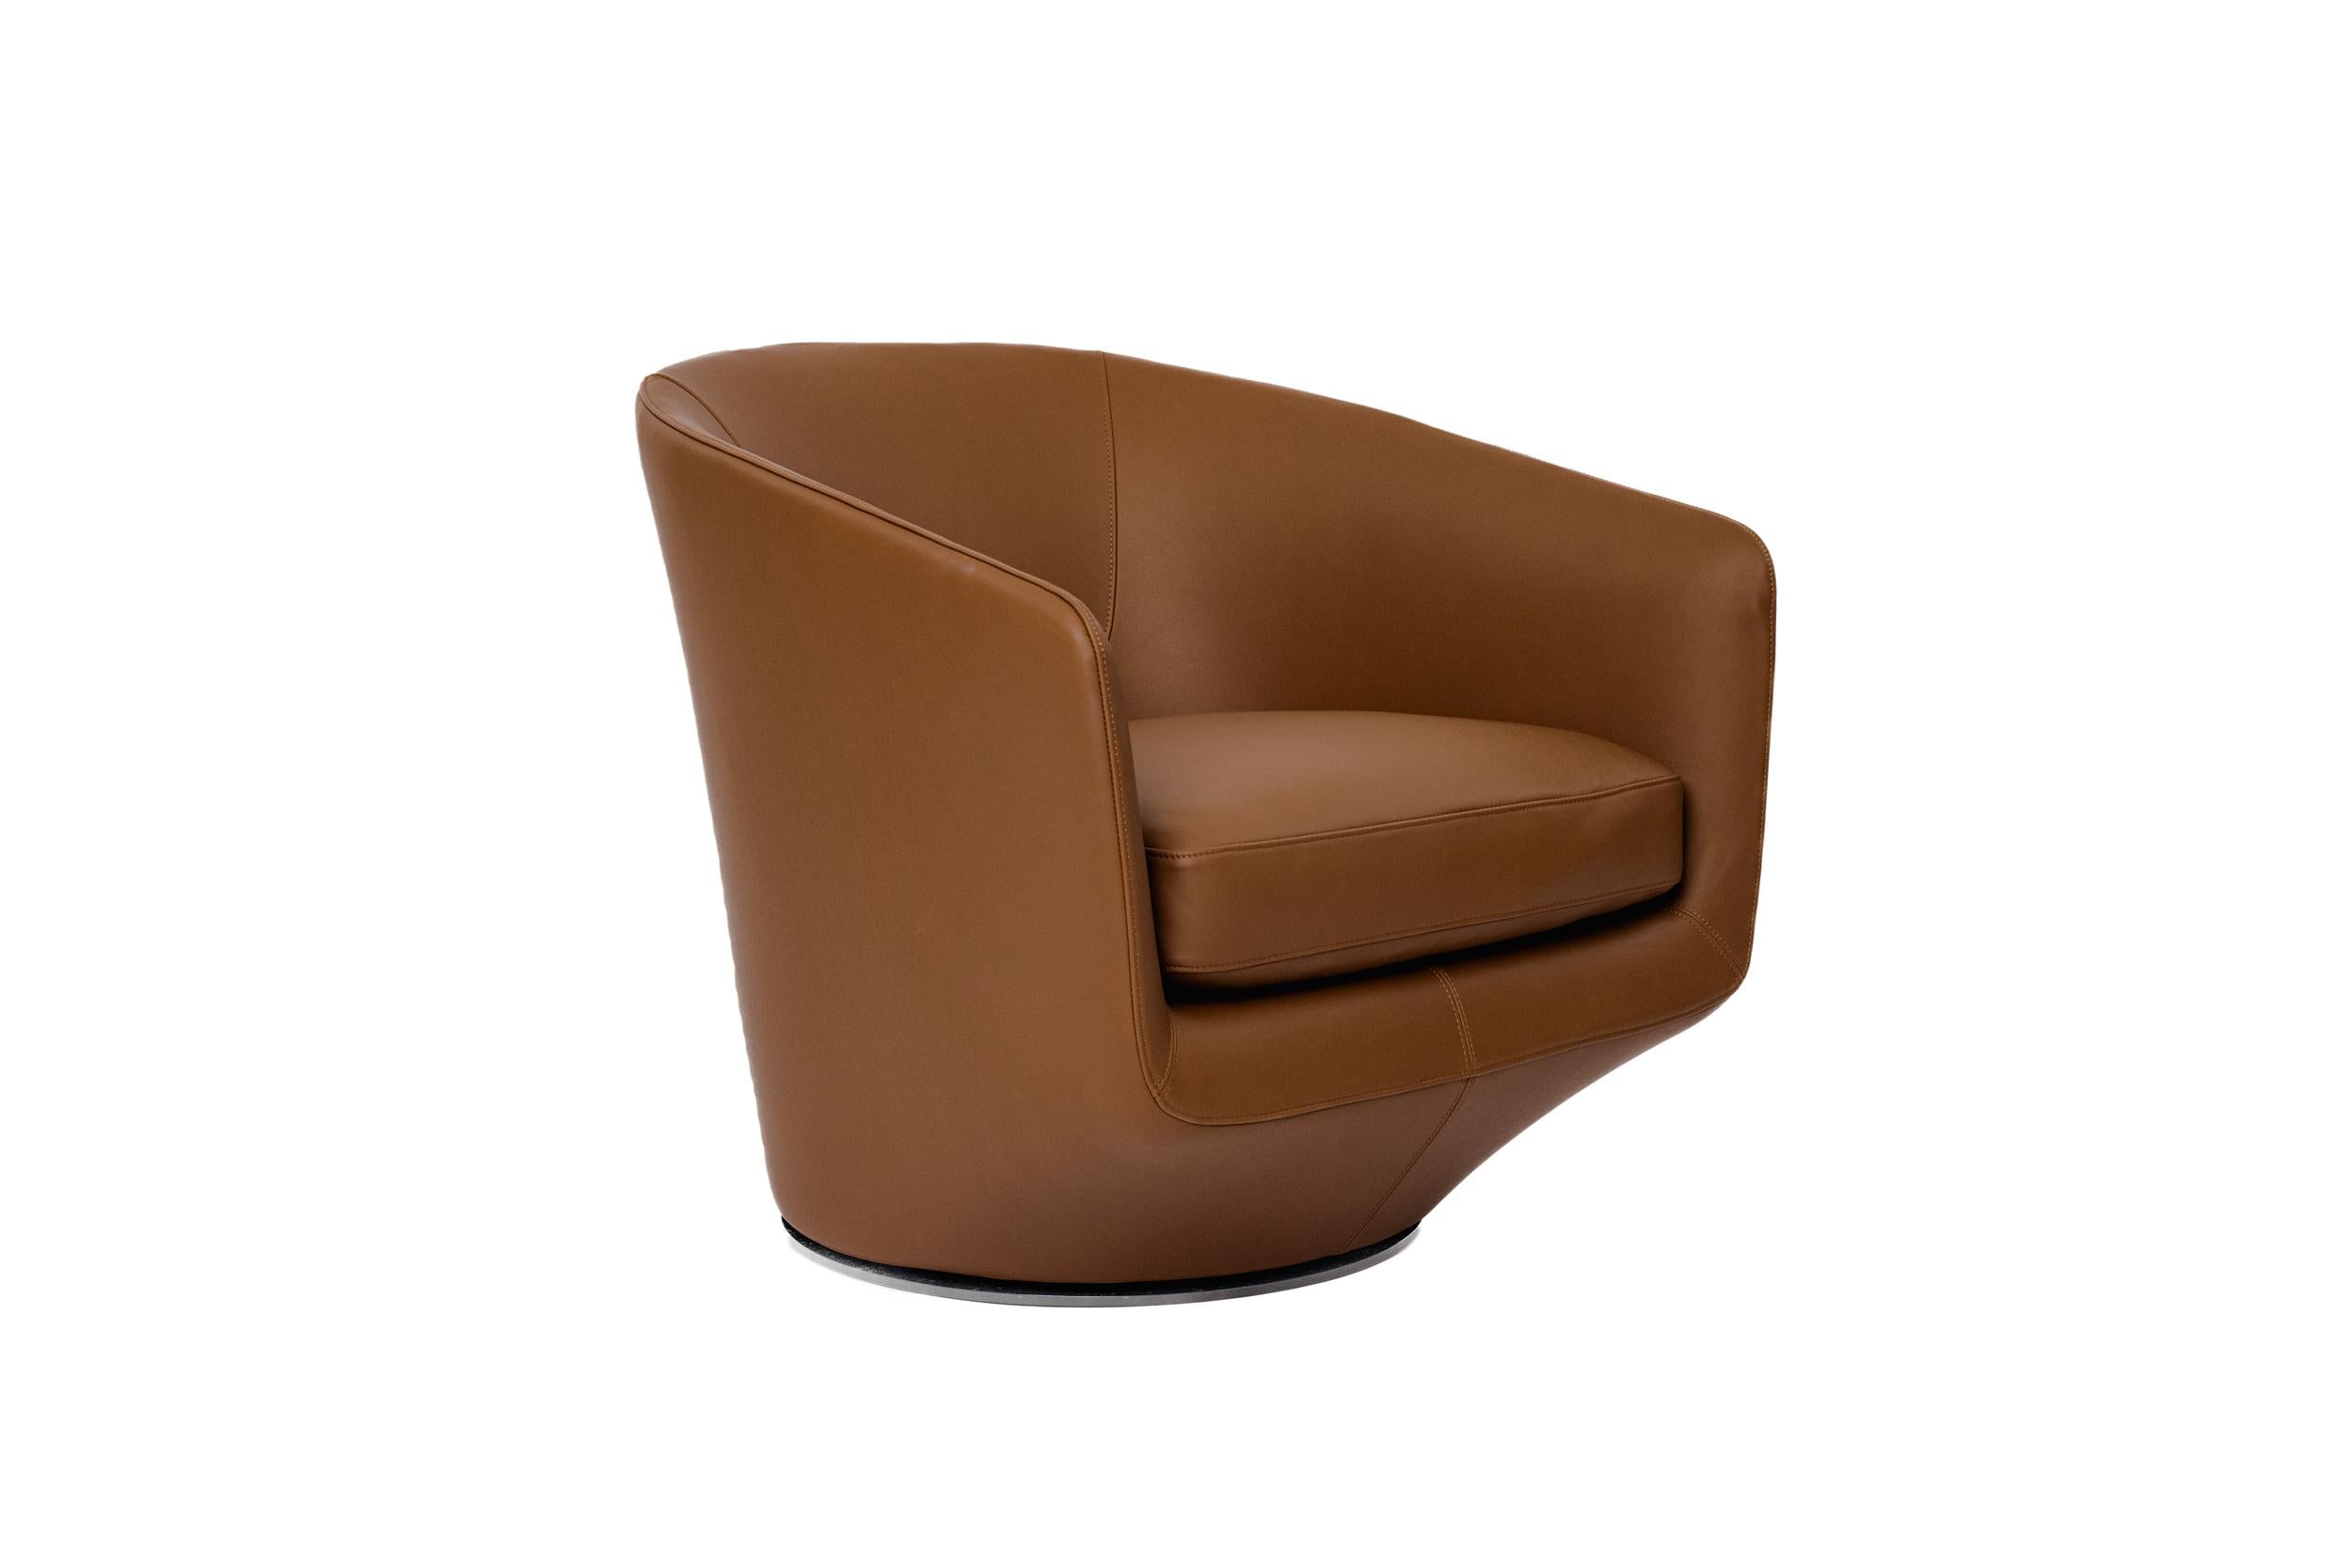 The U Turn by Bensen combines luxurious comfort with a tailored look. A modern spin on the classic club chair, its sophisticated form allows it to be used in various environments, from traditional to the most modern, and is suitable for contract or